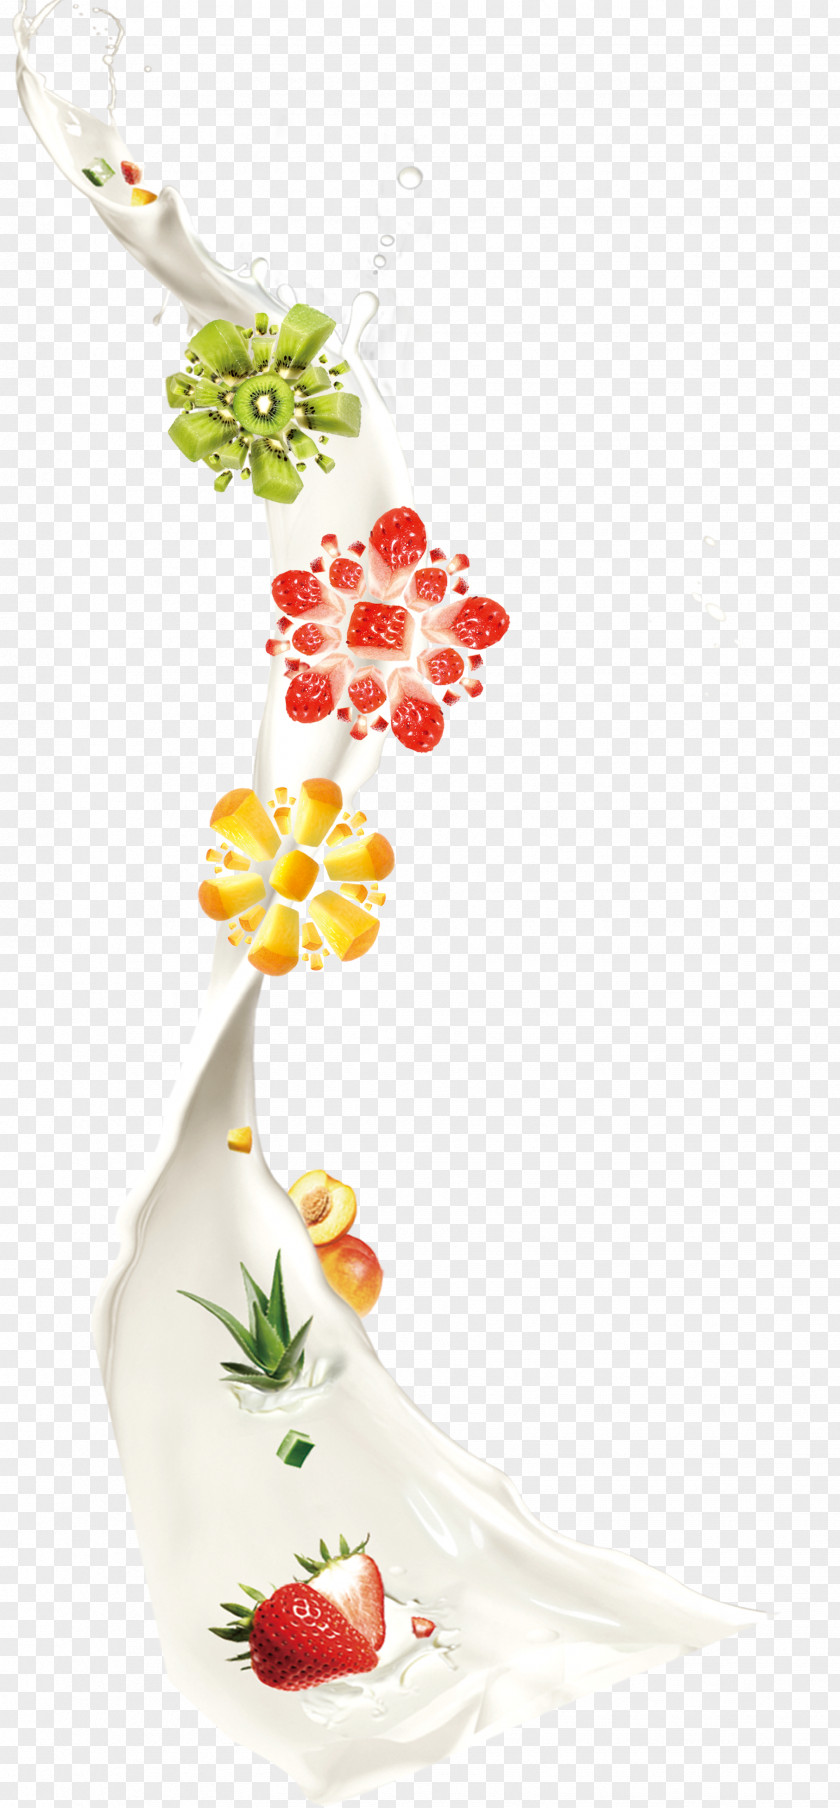 Splash Of Milk And Fruit Strawberry Cows PNG